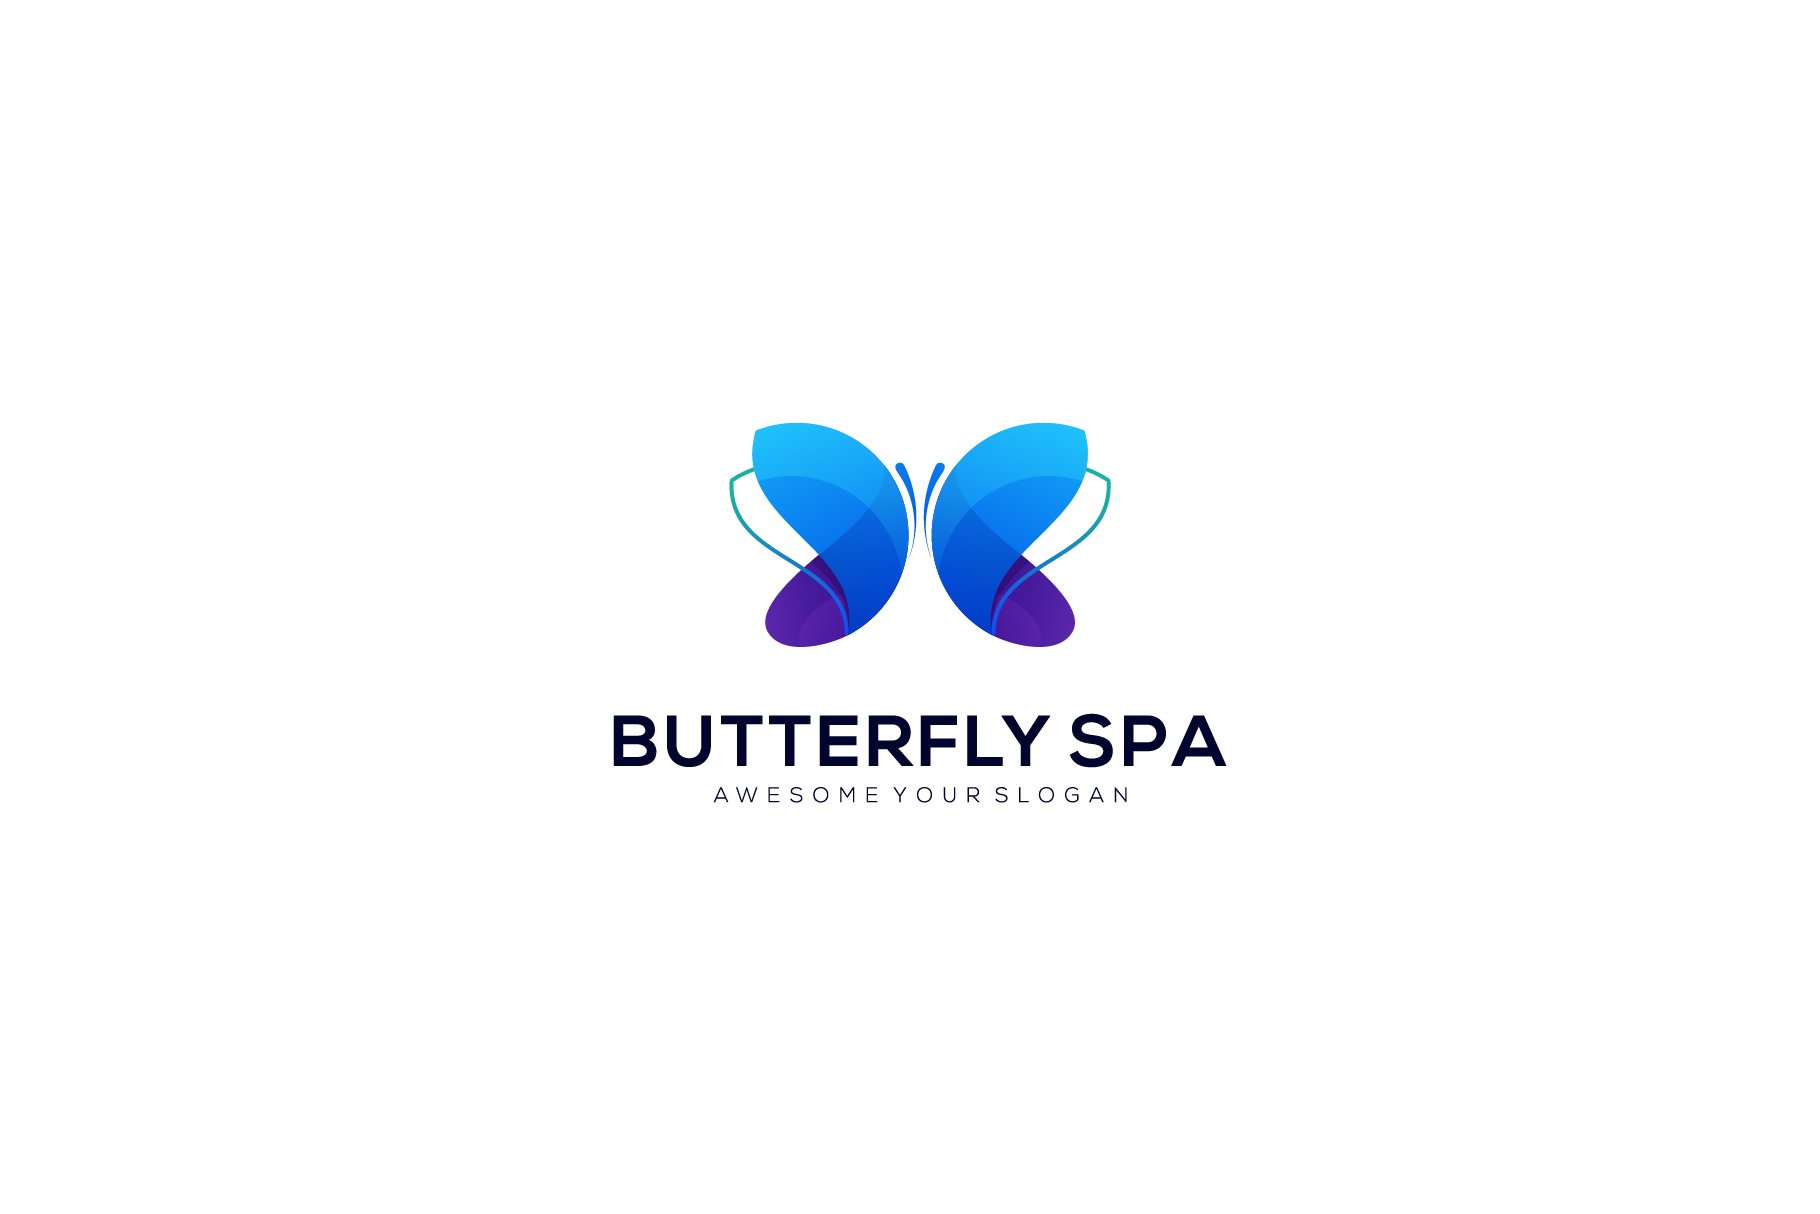 Premium butterfly spa logo design cover image.